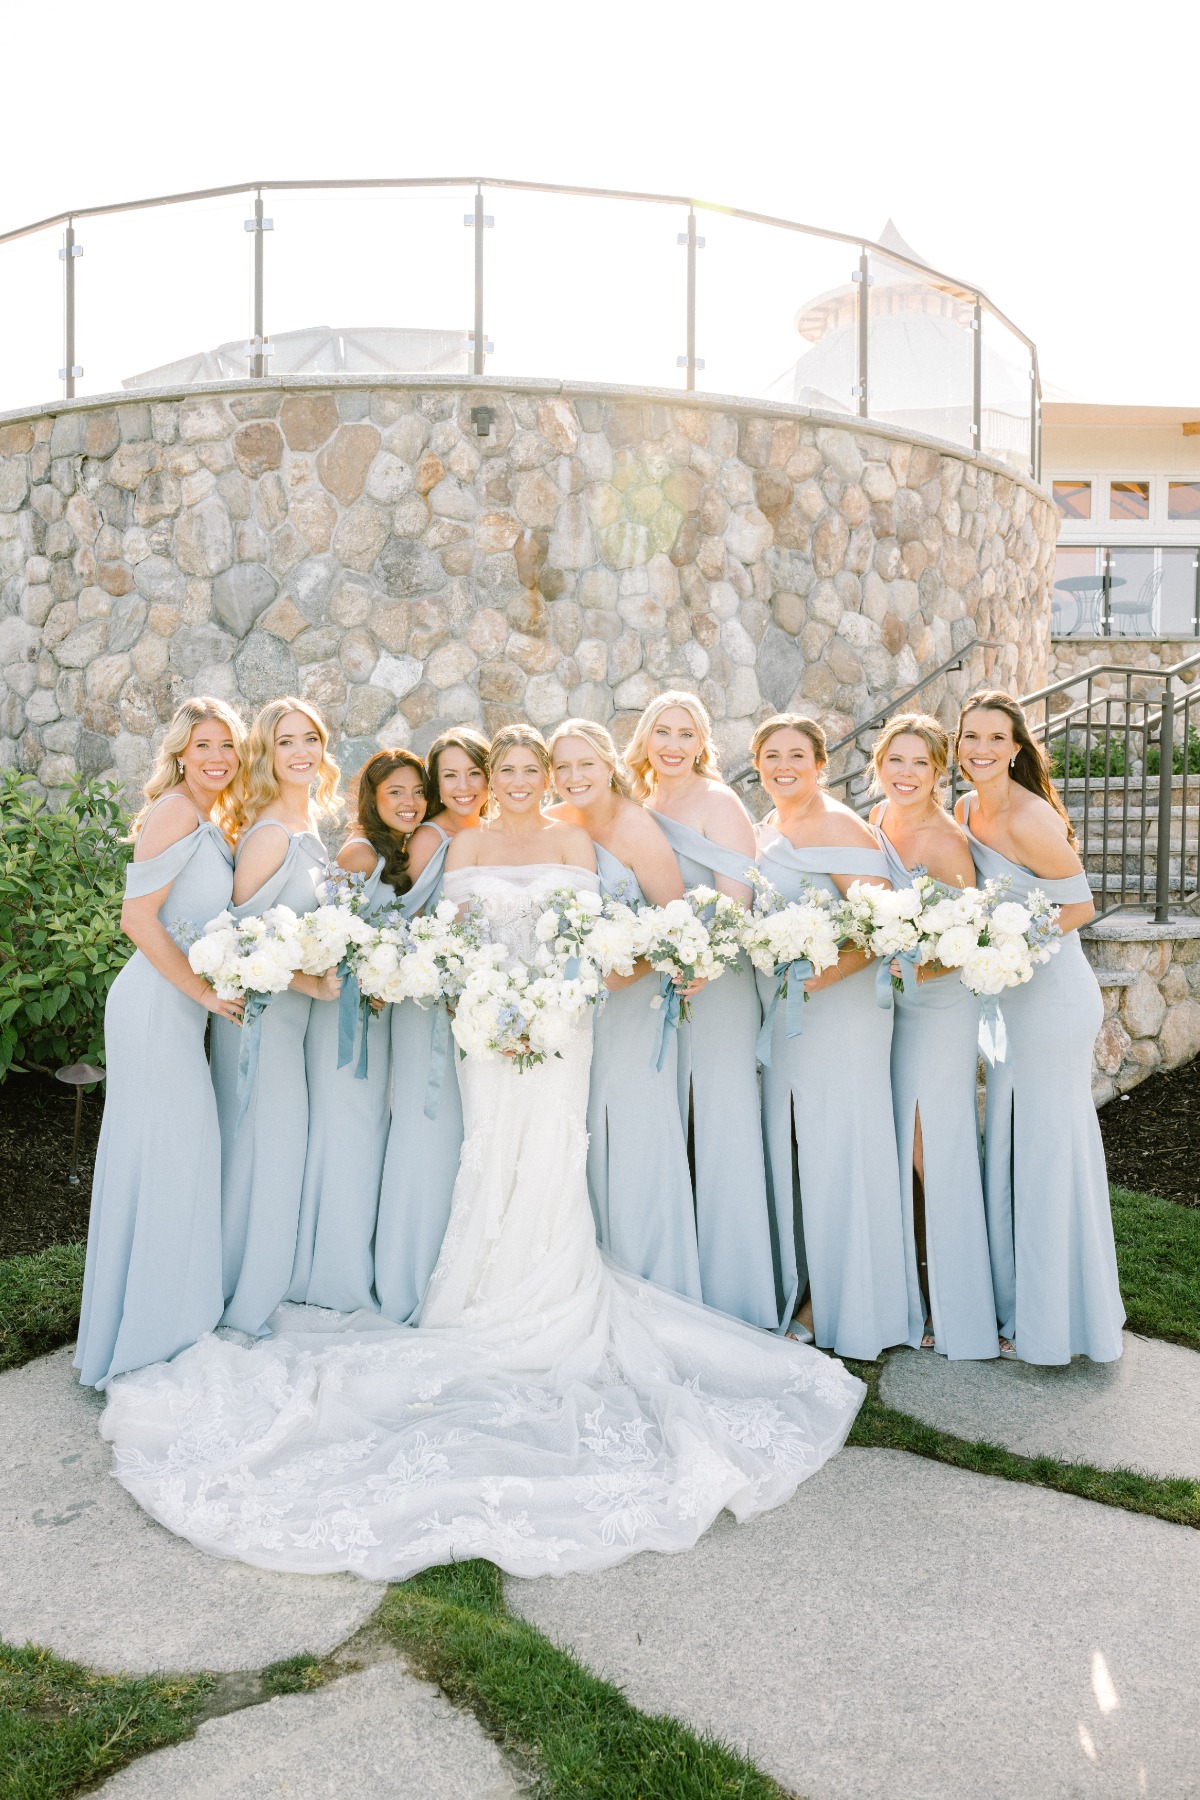 Bride in elegant lace dress with bridesmaids in pastel blue